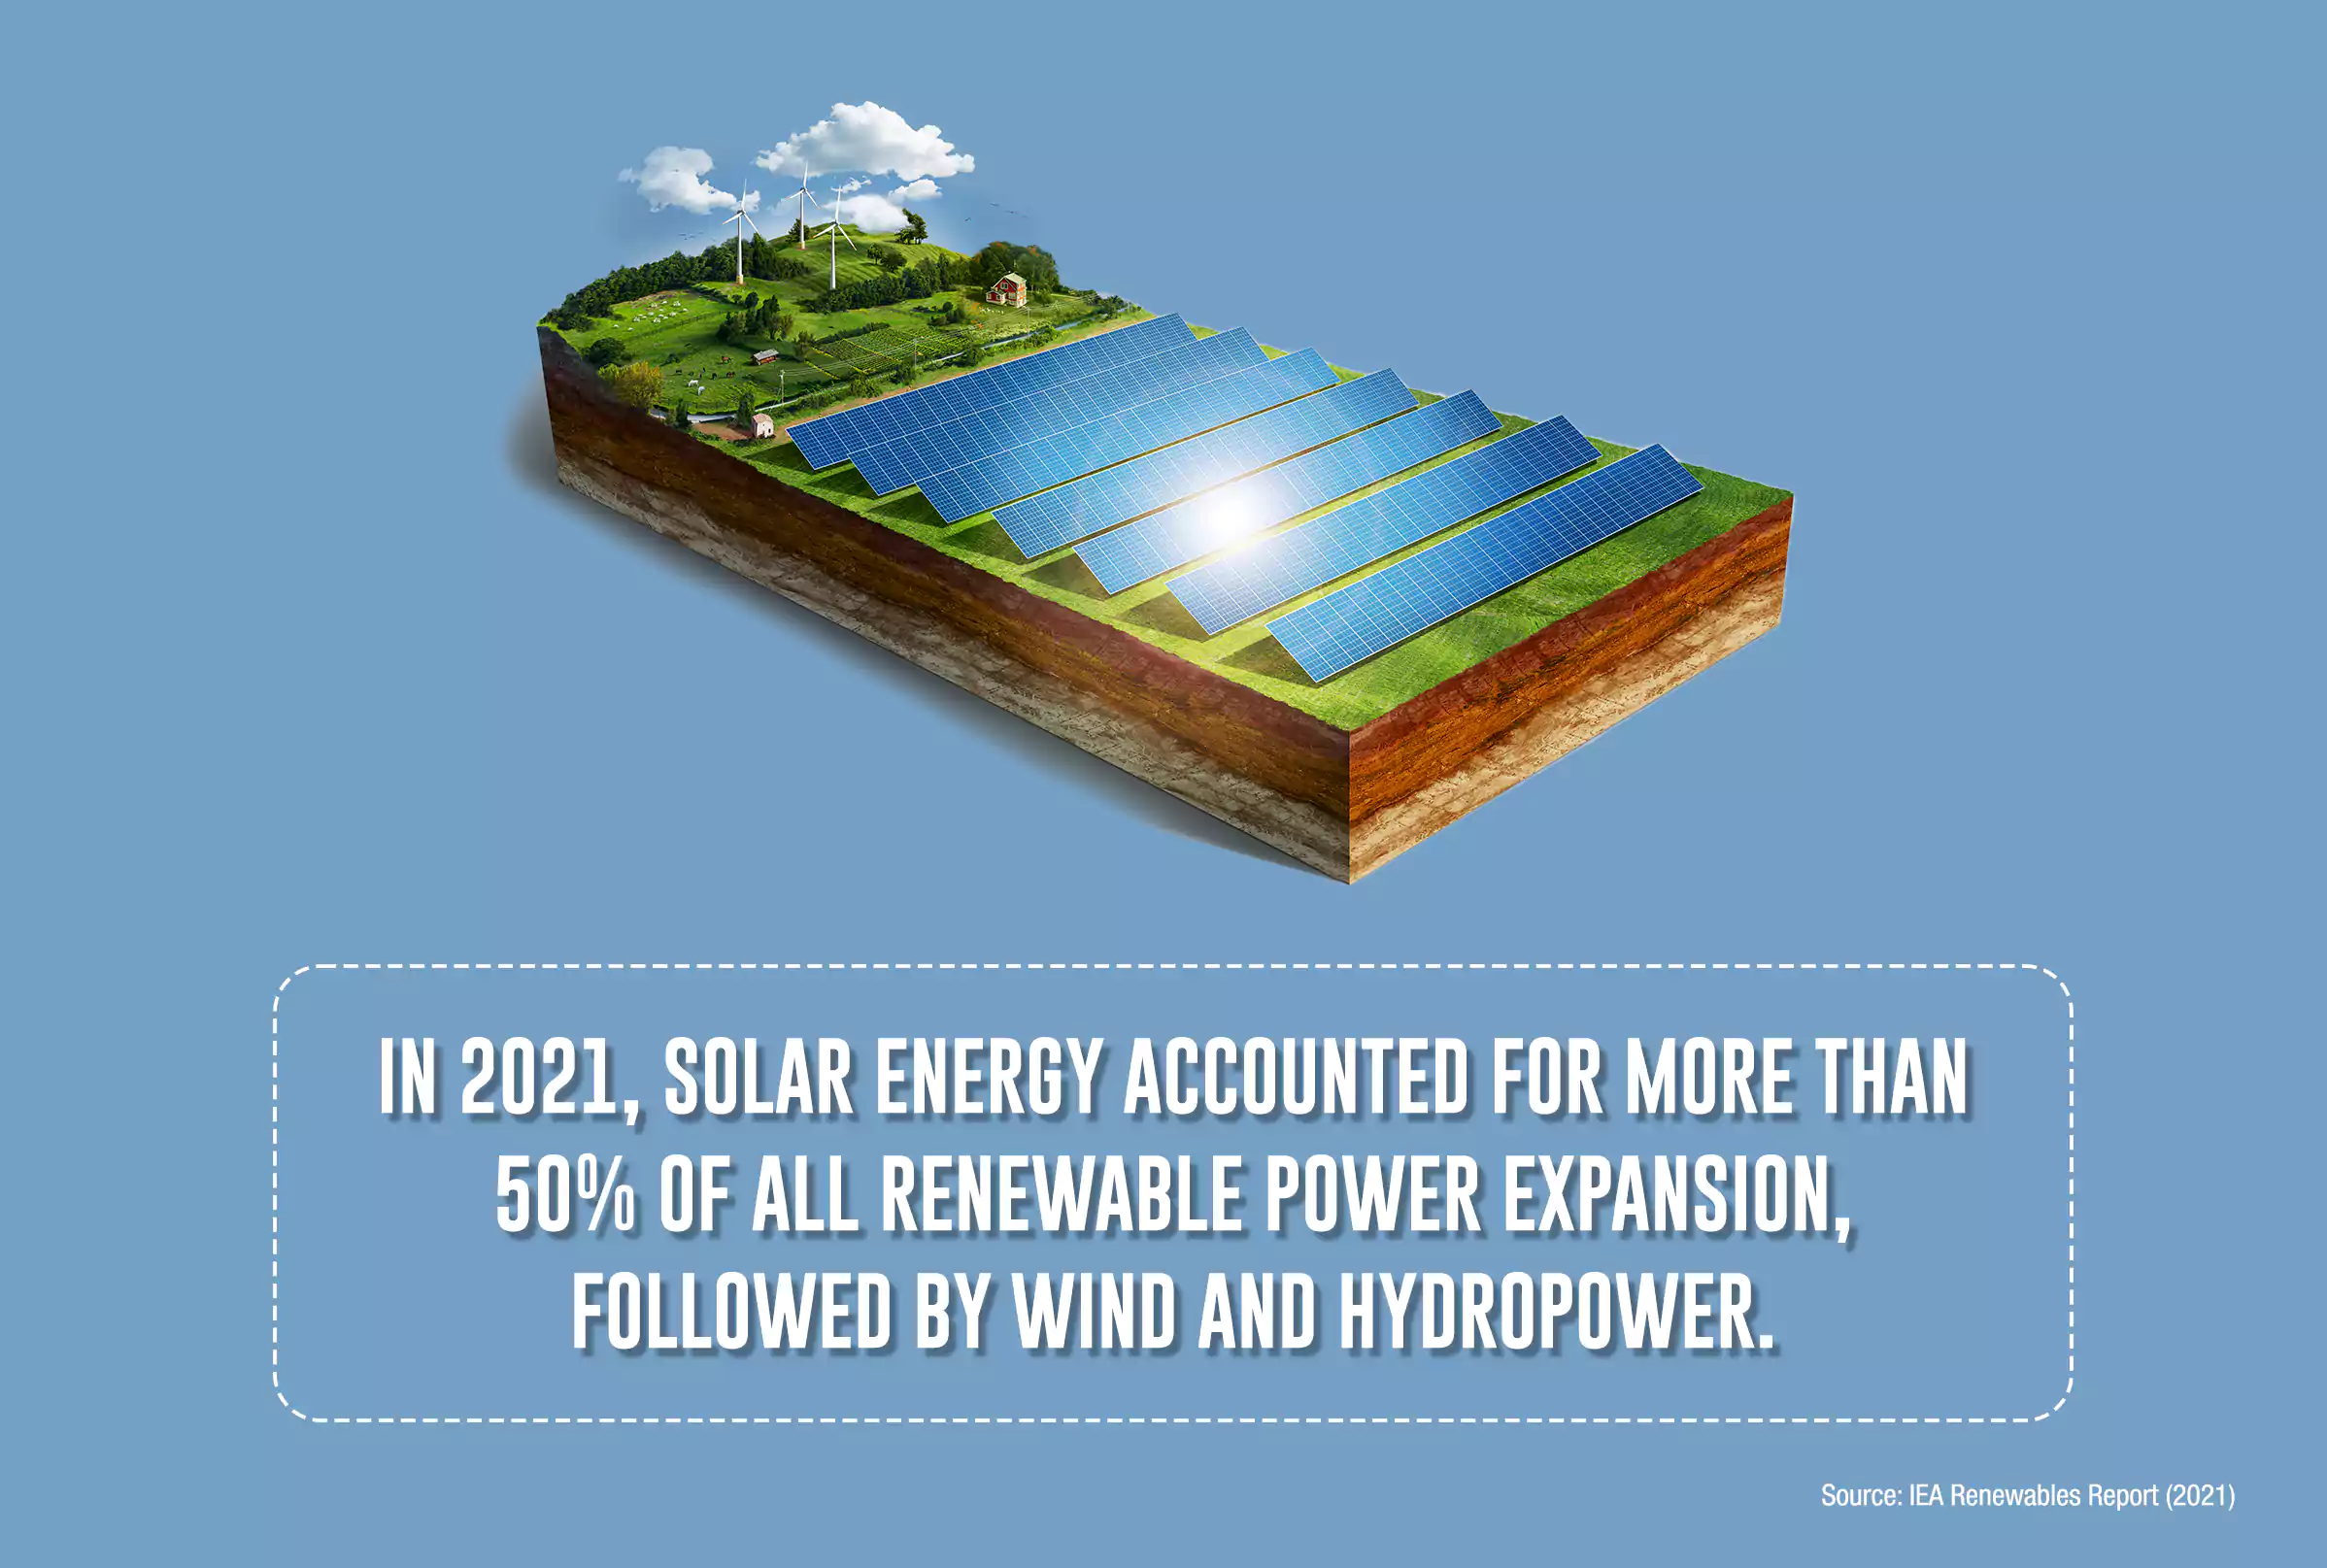 Solar energy is one of the renewables used today